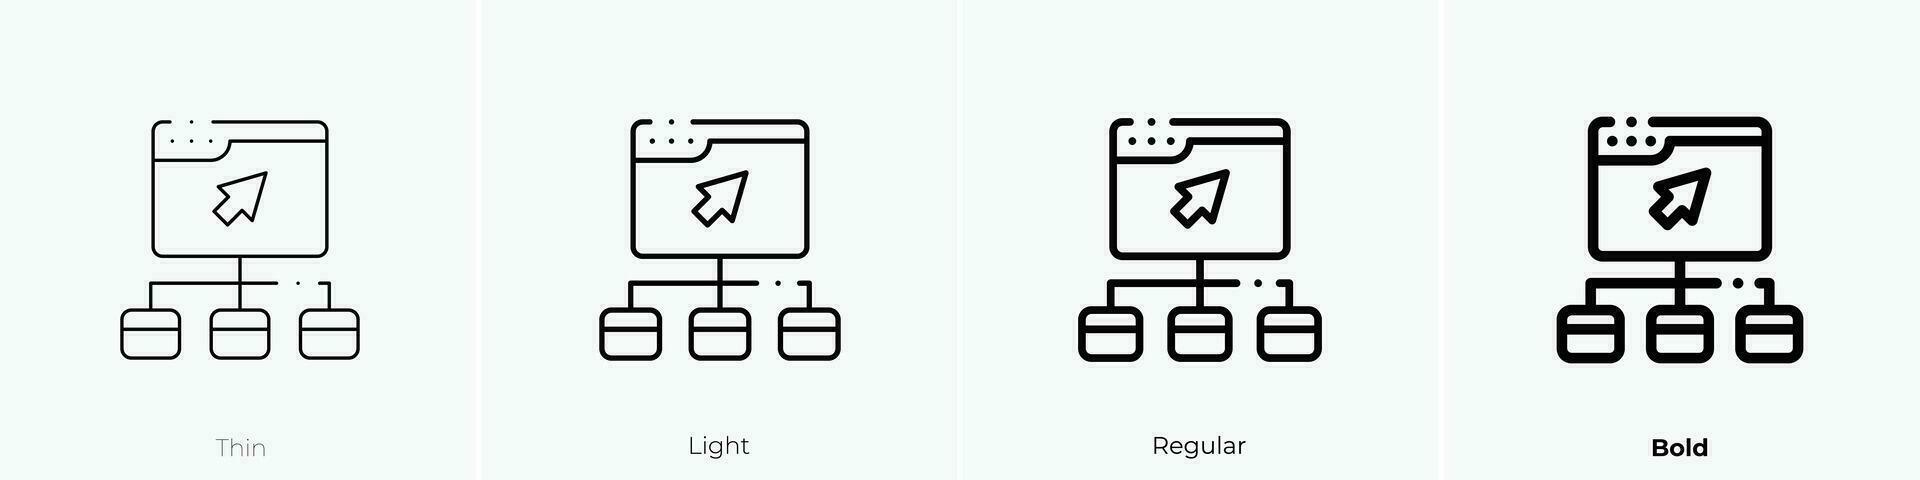 sitemap icon. Thin, Light, Regular And Bold style design isolated on white background vector